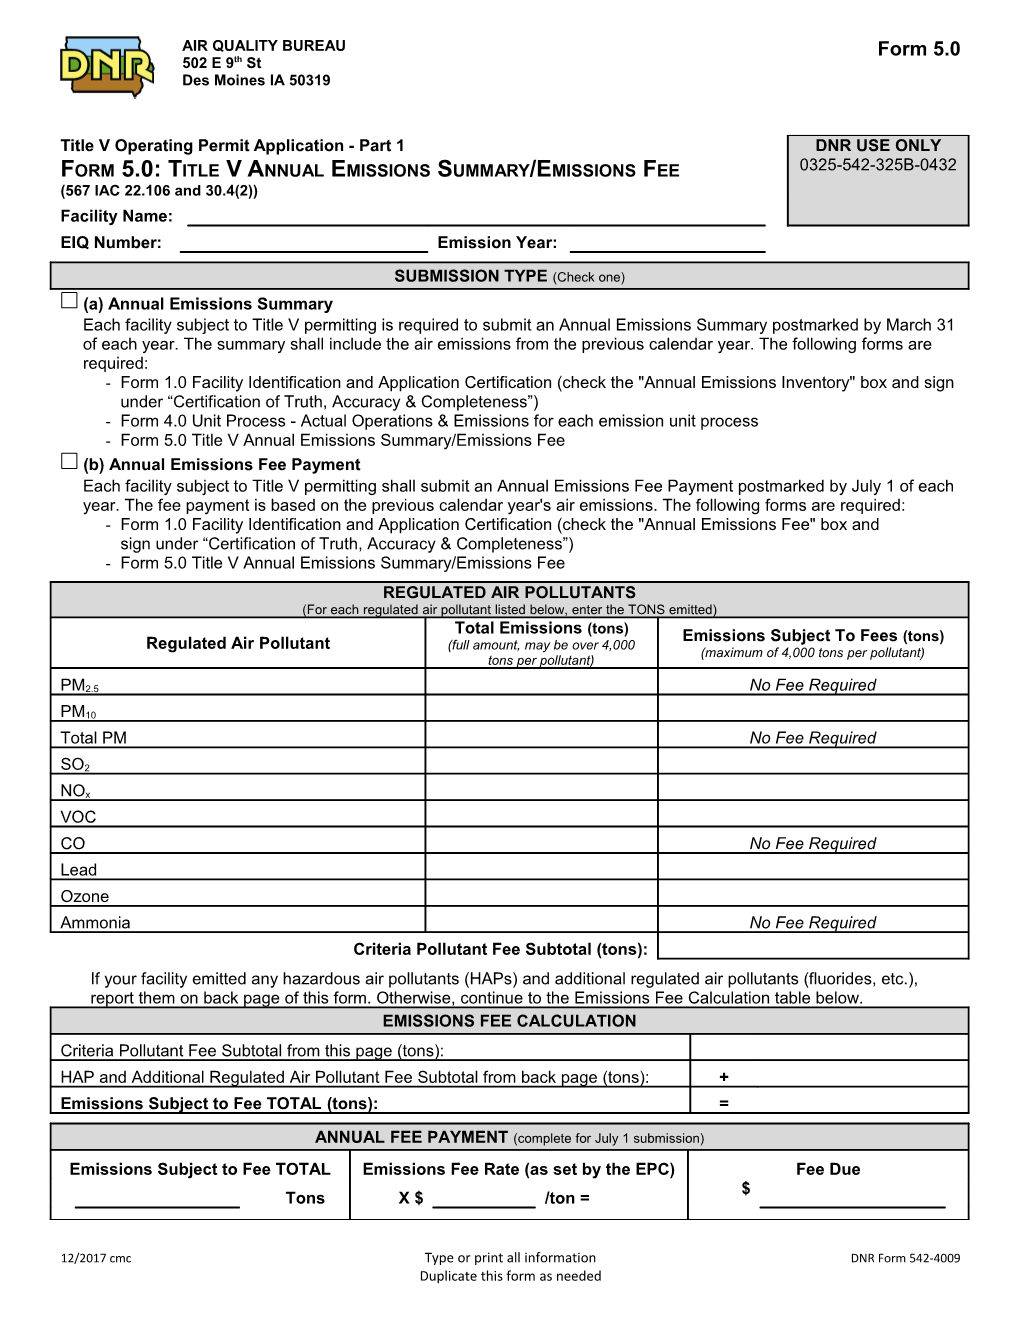 12/2017 Cmctype Or Print All Informationdnr Form 542-4009